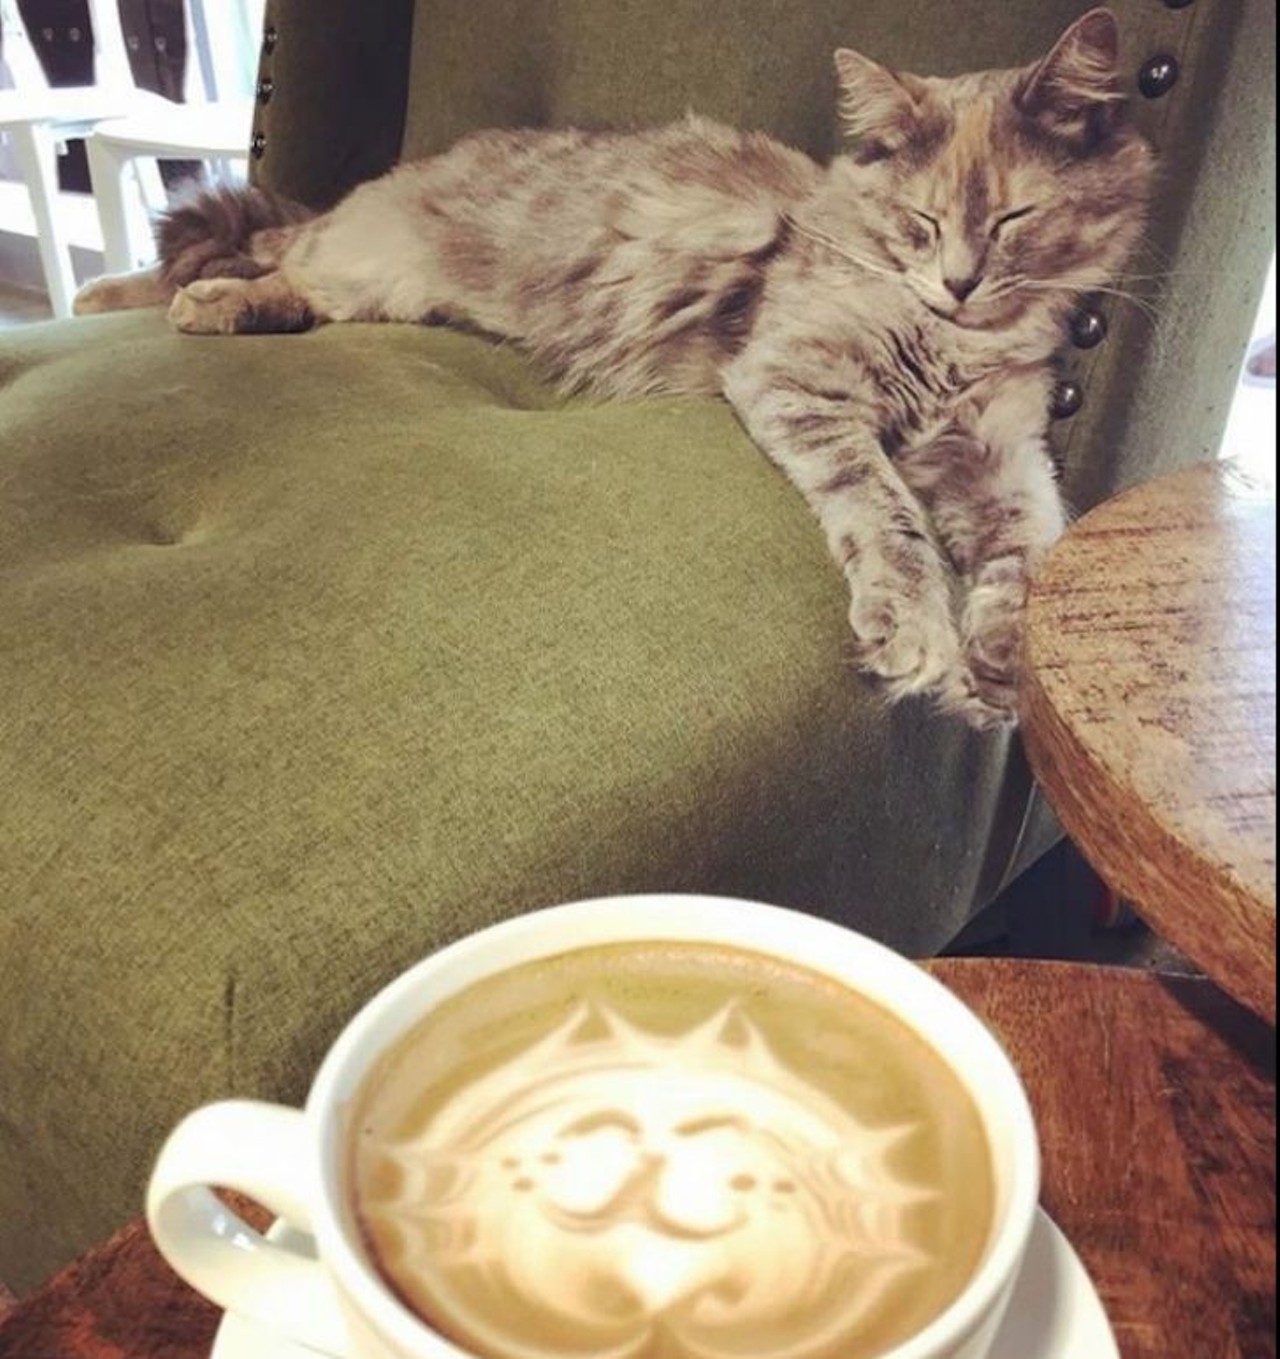 Pet some adorable fluffballs at Cat Cafe
Journey down to Clermont for a cat-lover&#146;s haven. Sip on some coffee and, for an $8 fee, pet and play with the cutest adoptable cats.More information here 
Photo via Orlando Cat Cafe/Facebook